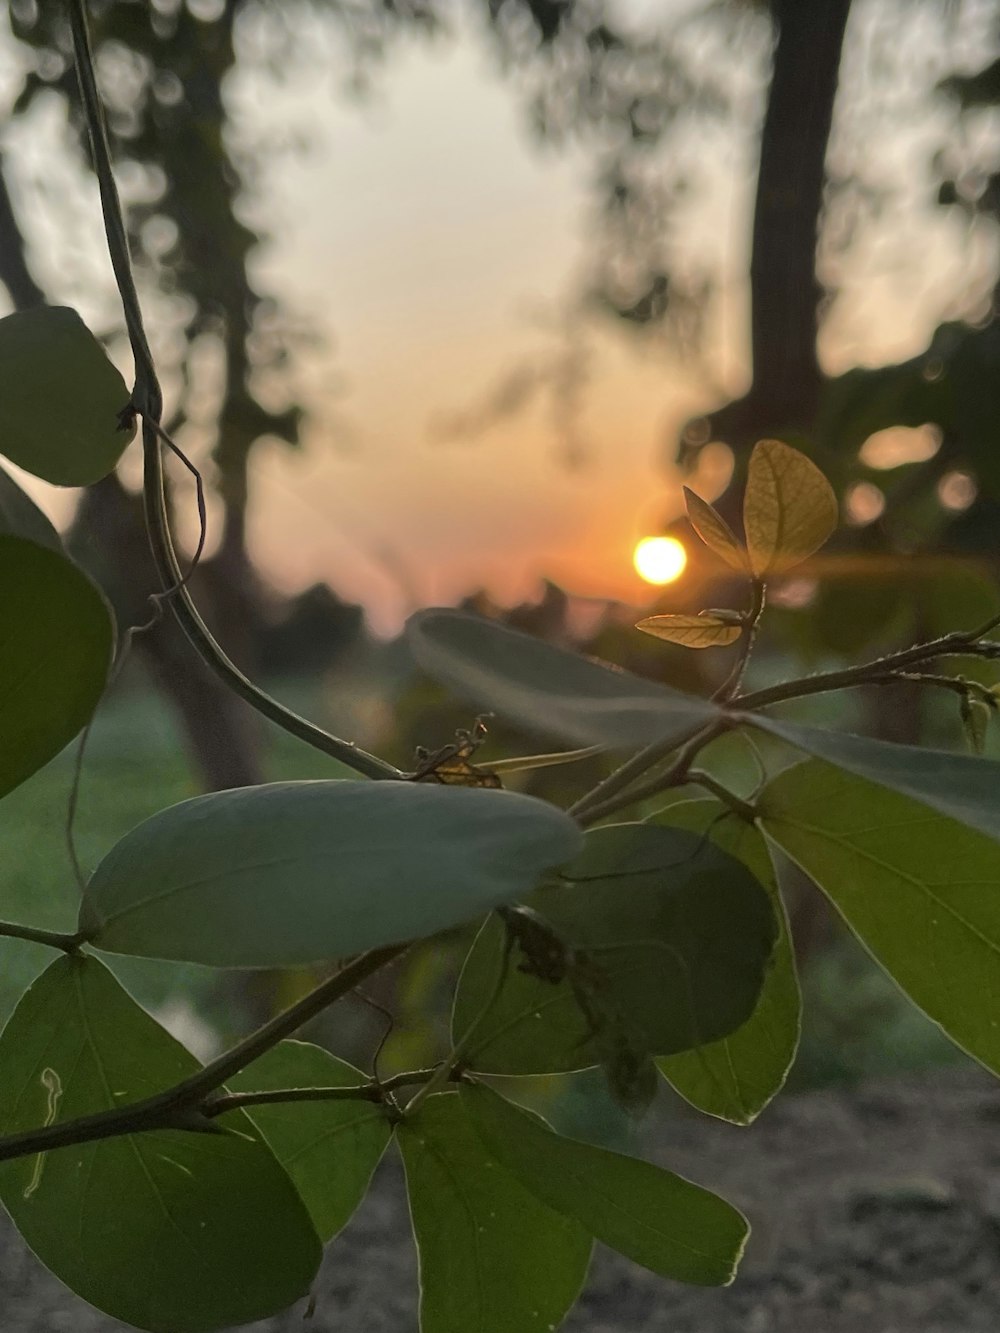 a tree branch with leaves and the sun setting in the background